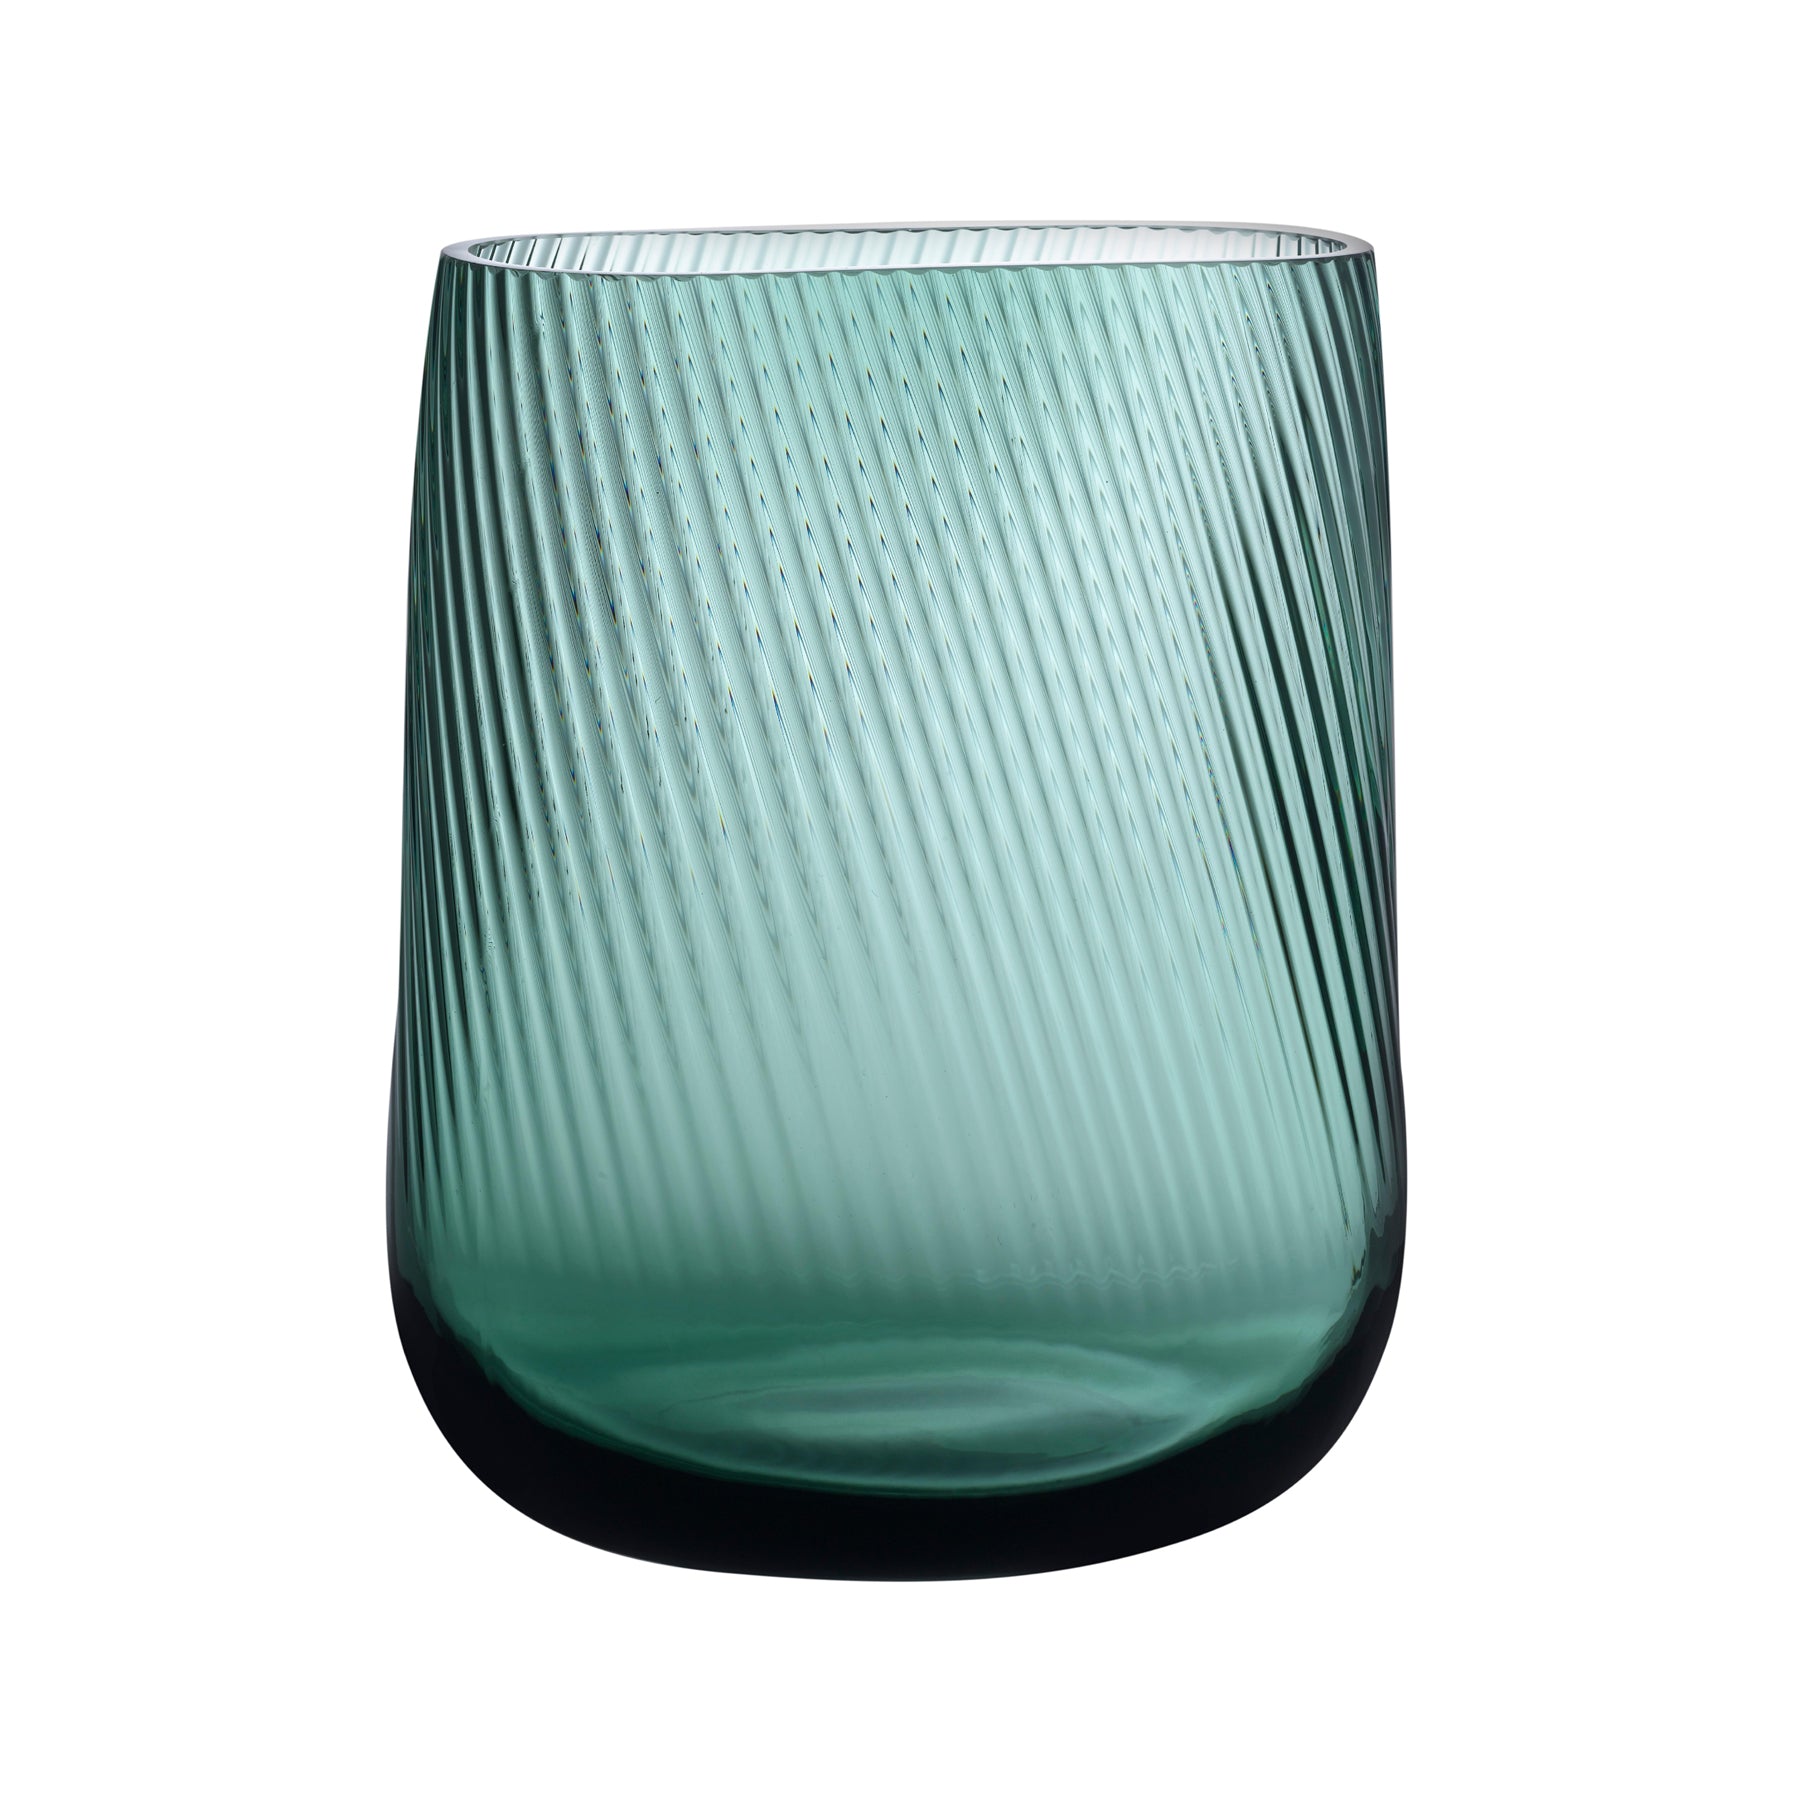 Nude Opti vase tall in smoked green by Defne Koz